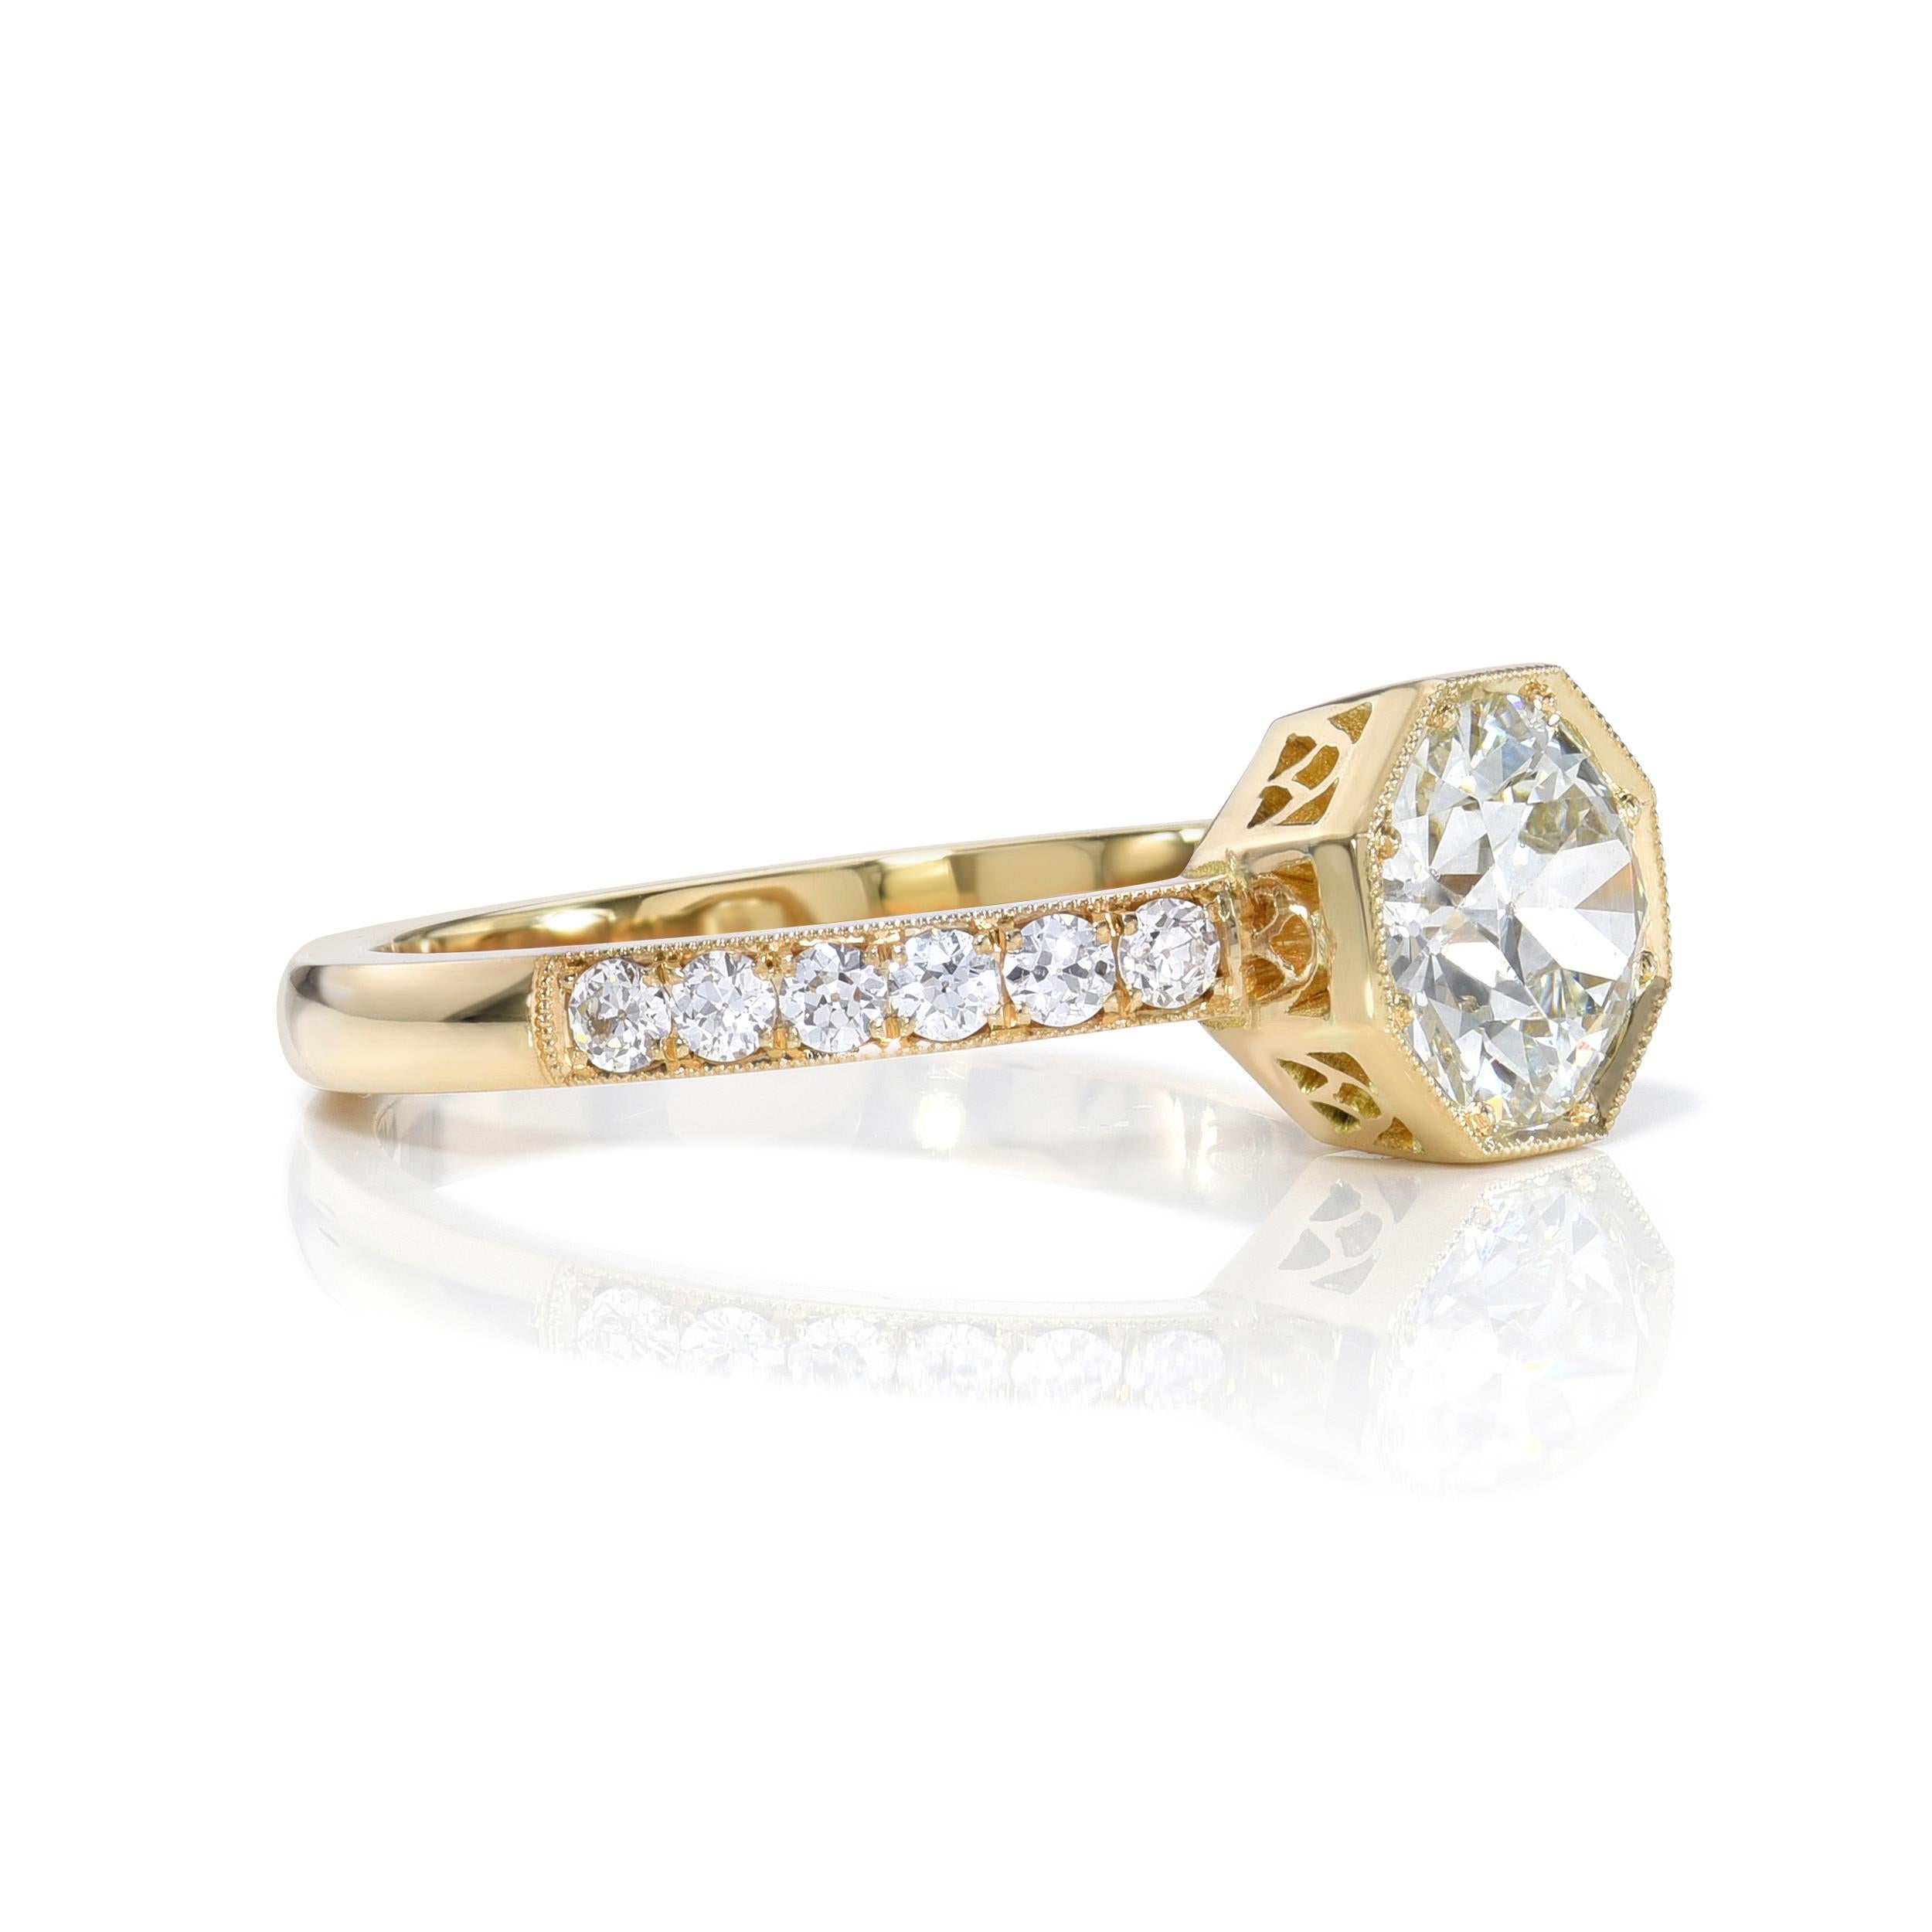 0.90ct J/VS1 GIA certified old European cut diamond with 0.22ctw old European cut accent diamonds prong set in a handcrafted 18K yellow gold mounting.